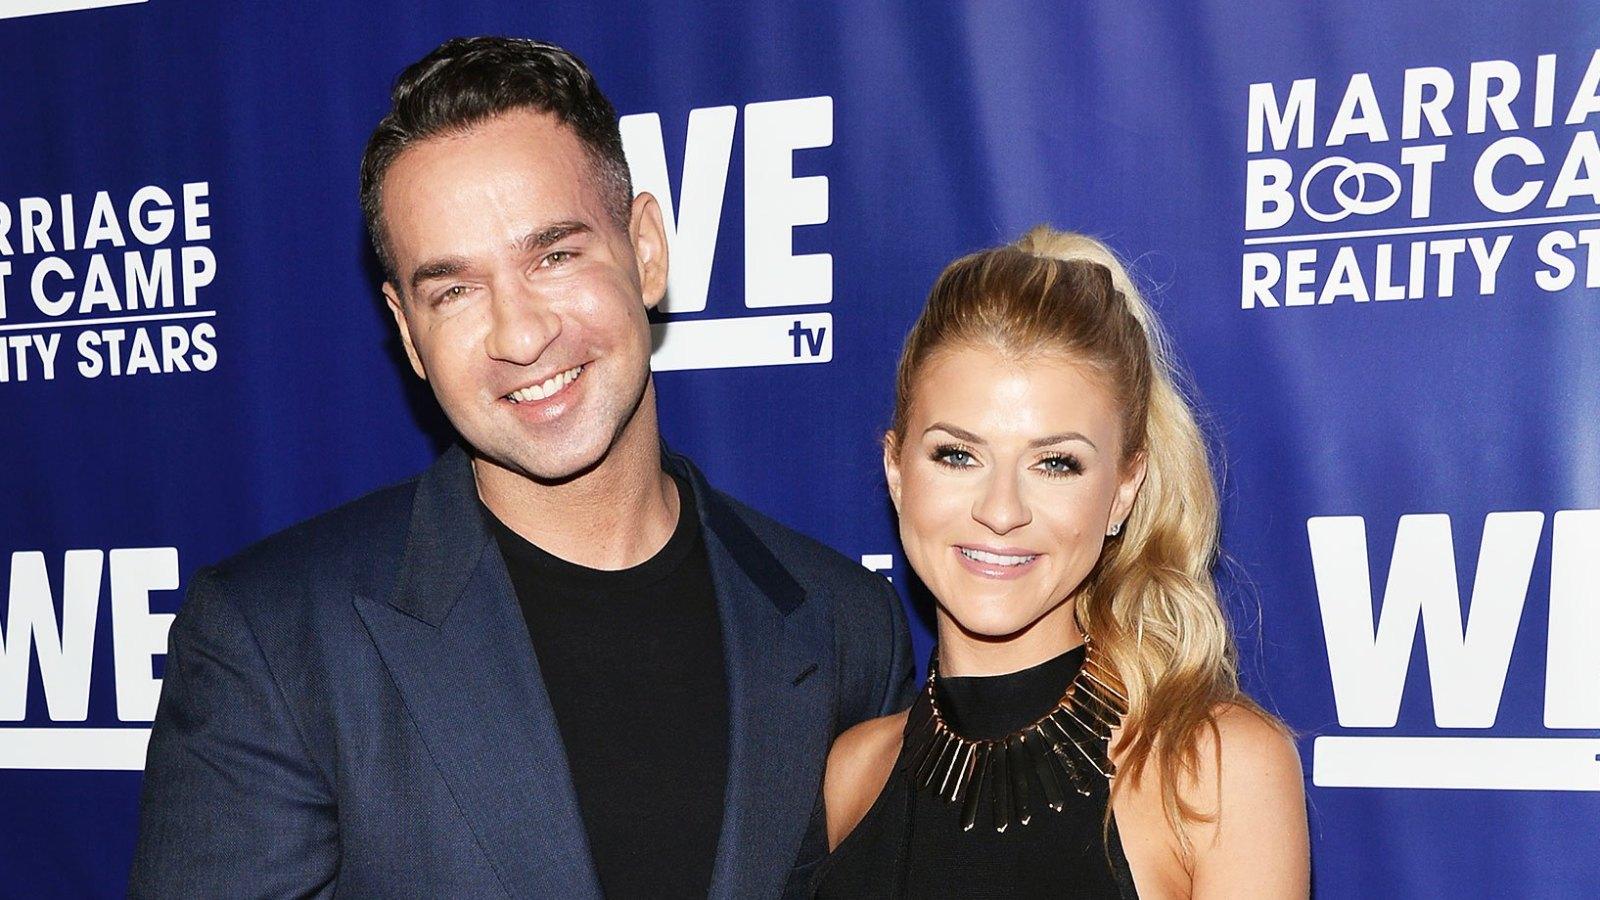 Mike 'The Situation' Sorrentino's Wife Lauren Takes His Last Name